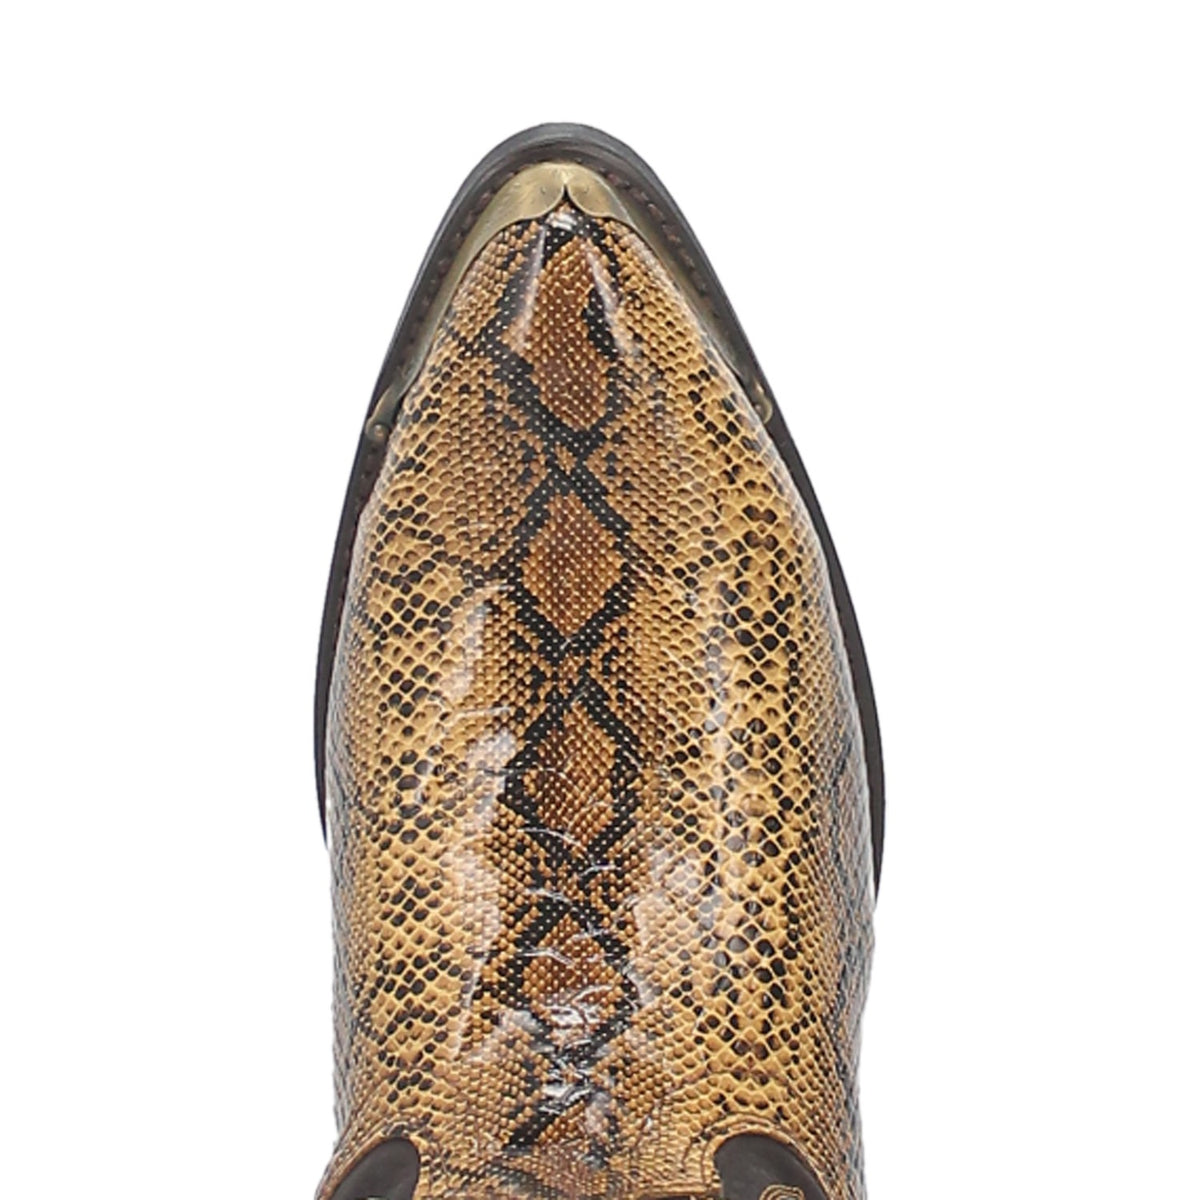 MONTY SNAKE PRINT BOOT Cover